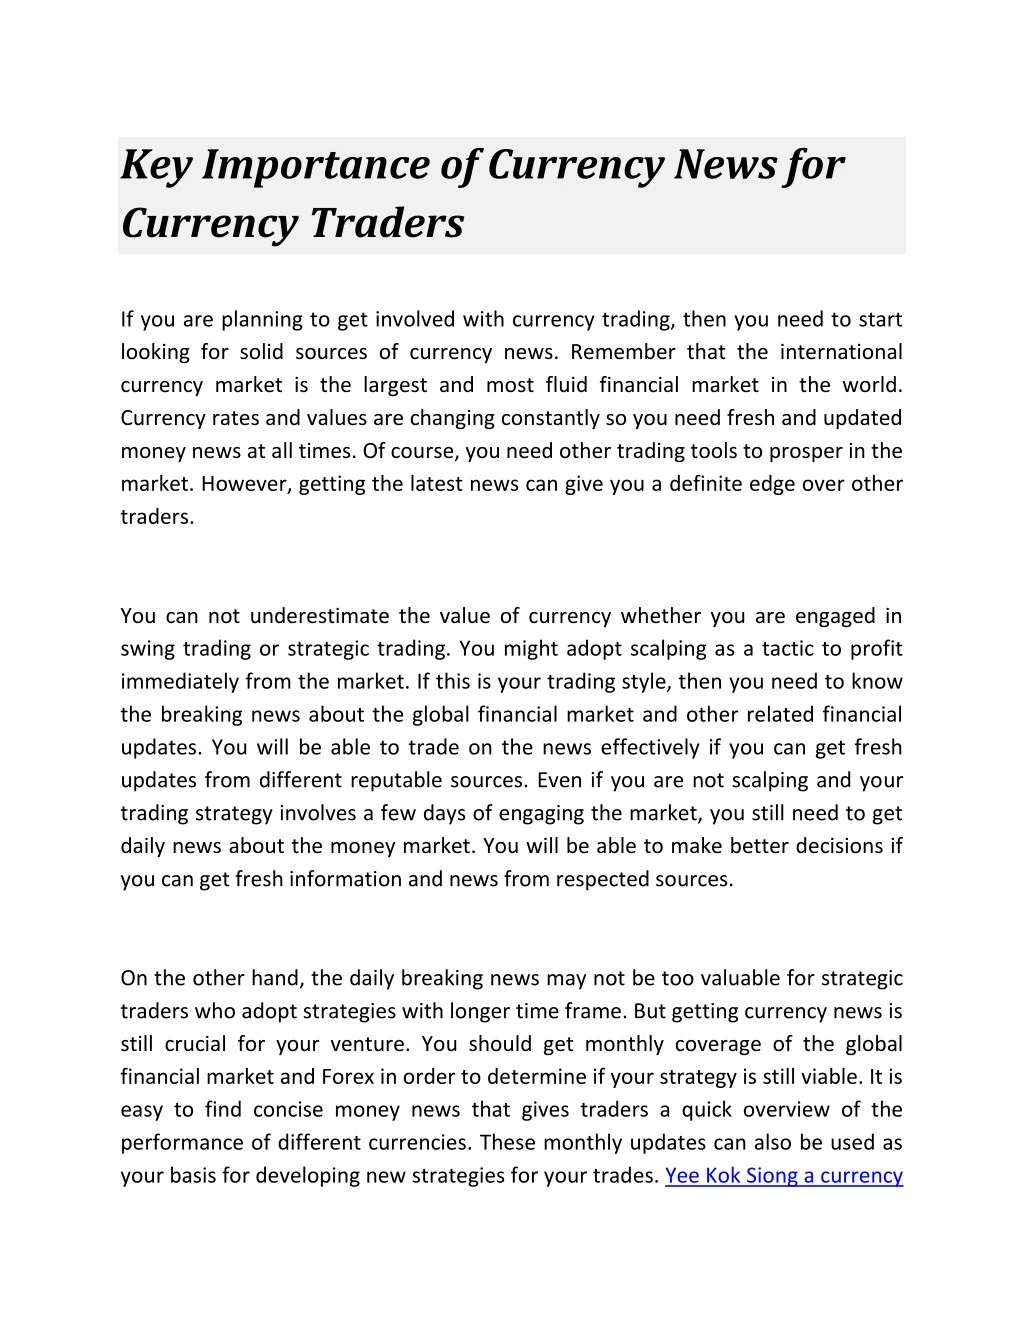 key importance of currency news for currency